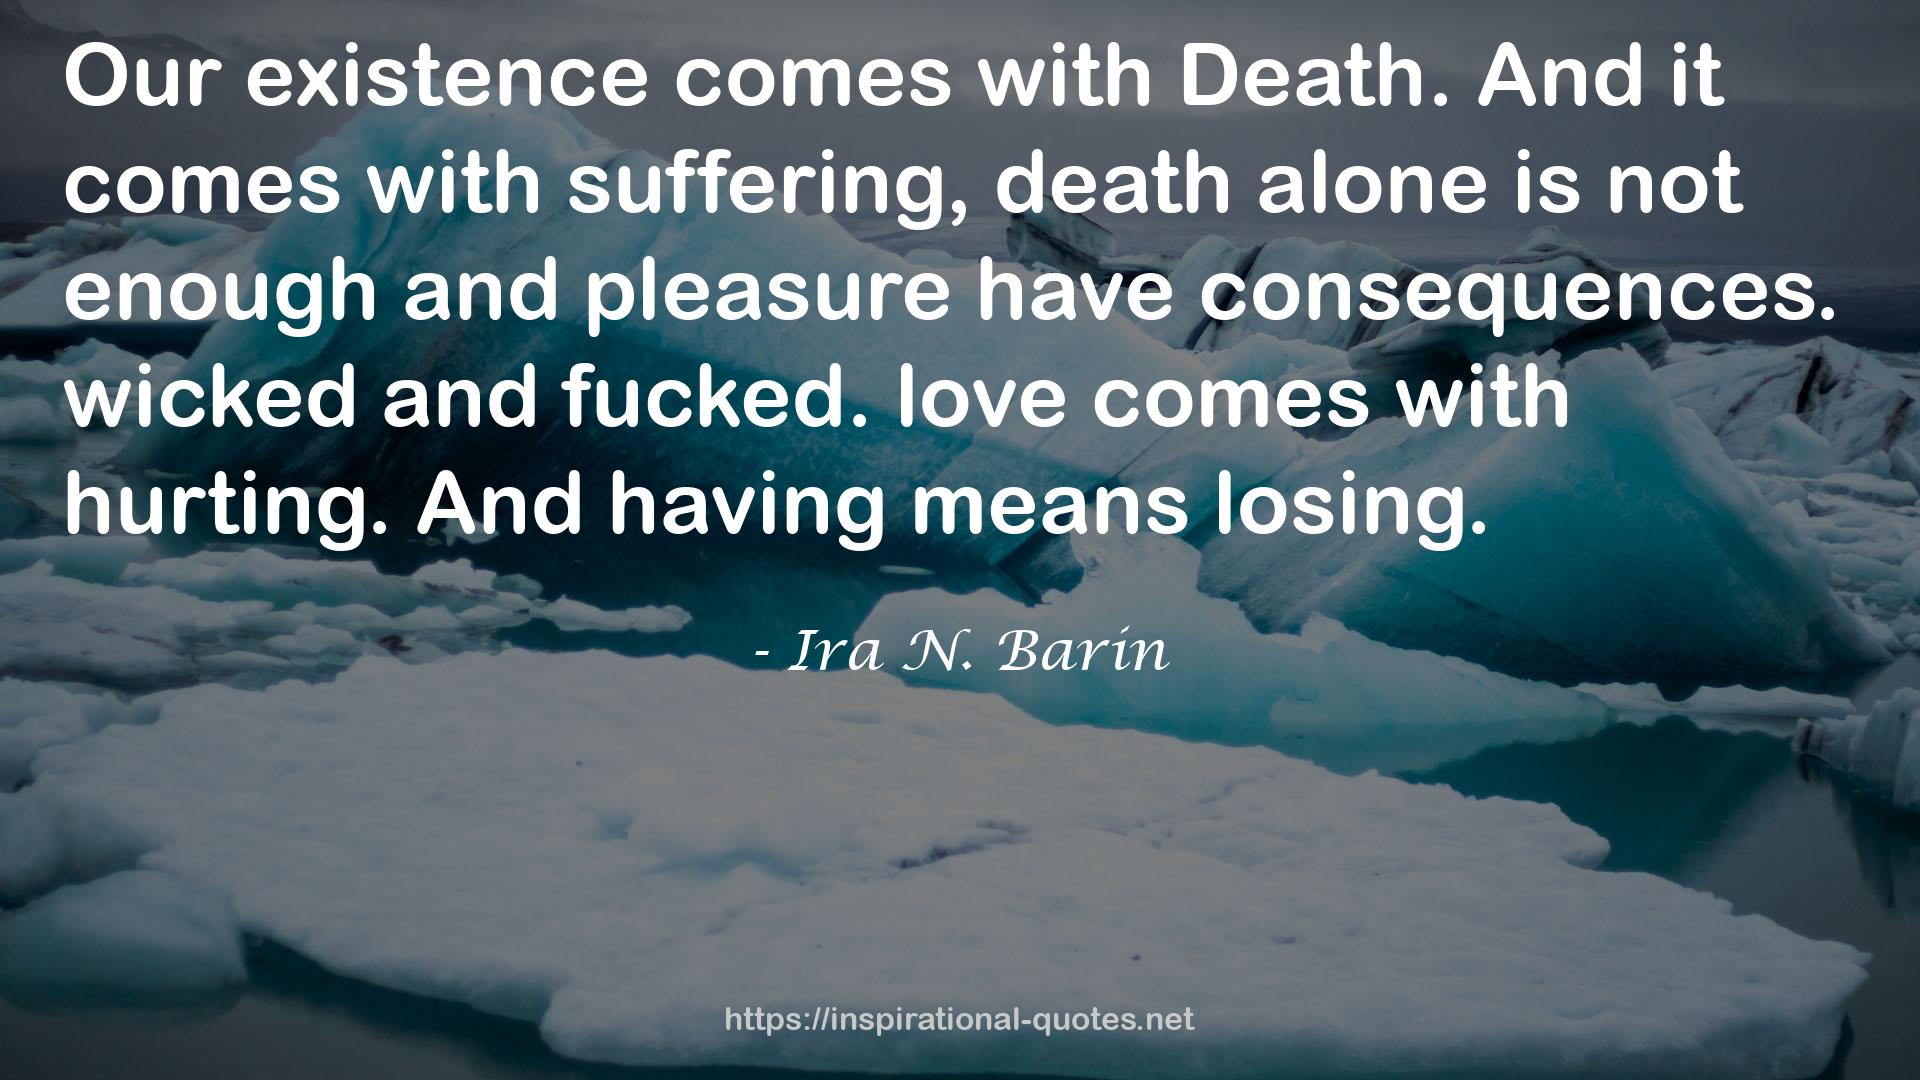 Ira N. Barin QUOTES